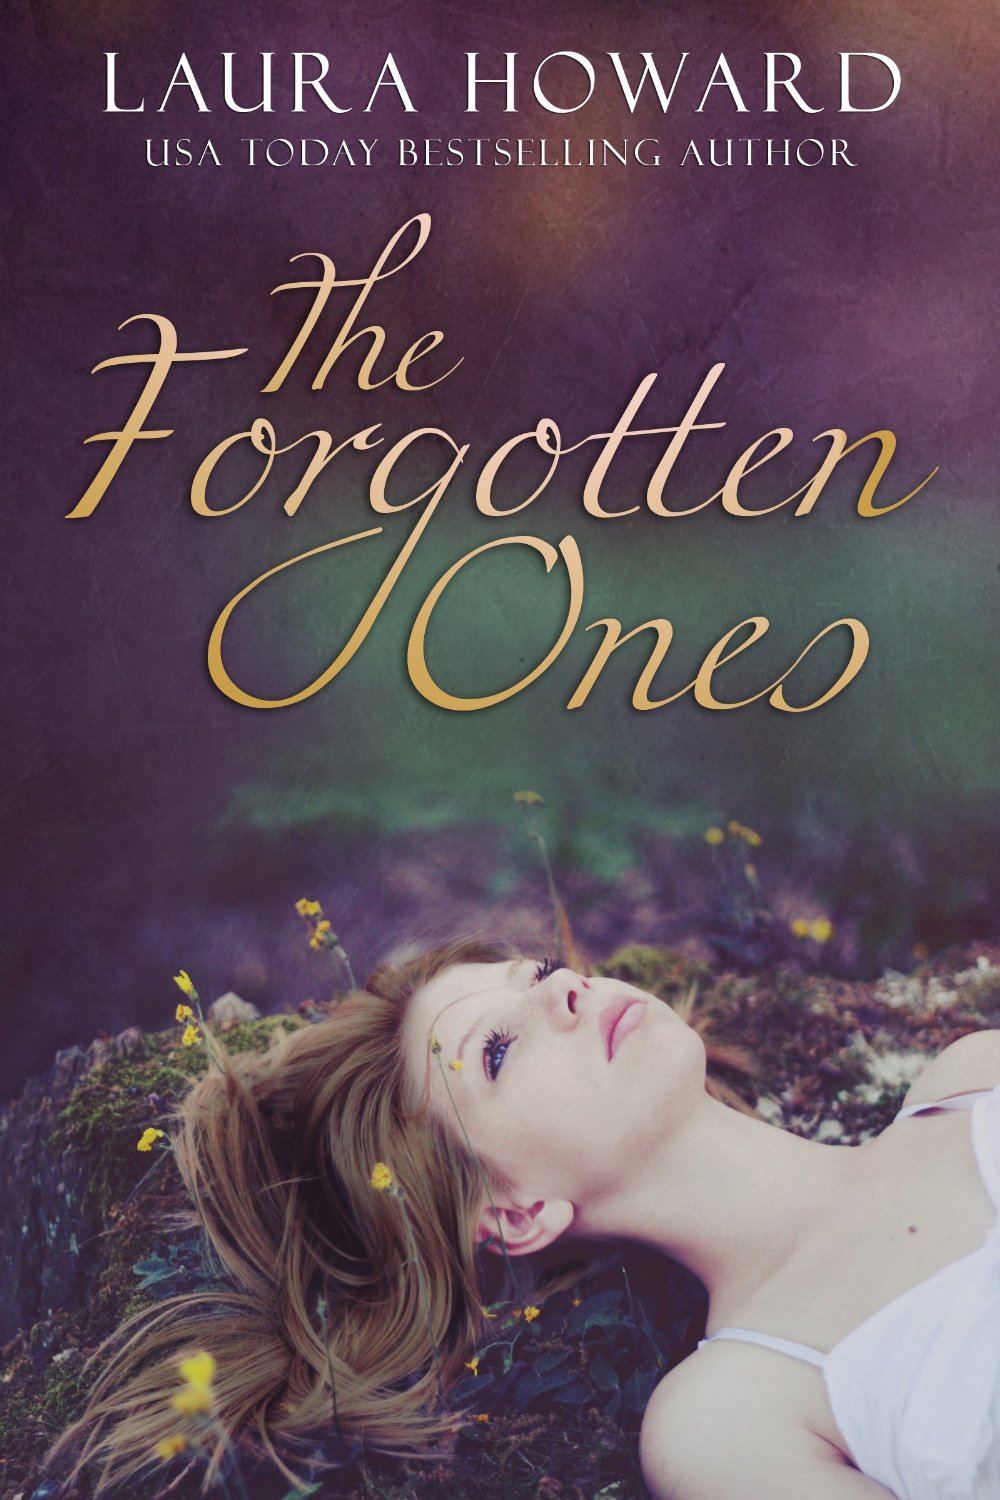 The Forgotten Ones: Book 1 (The Danaan Trilogy) by Laura Howard